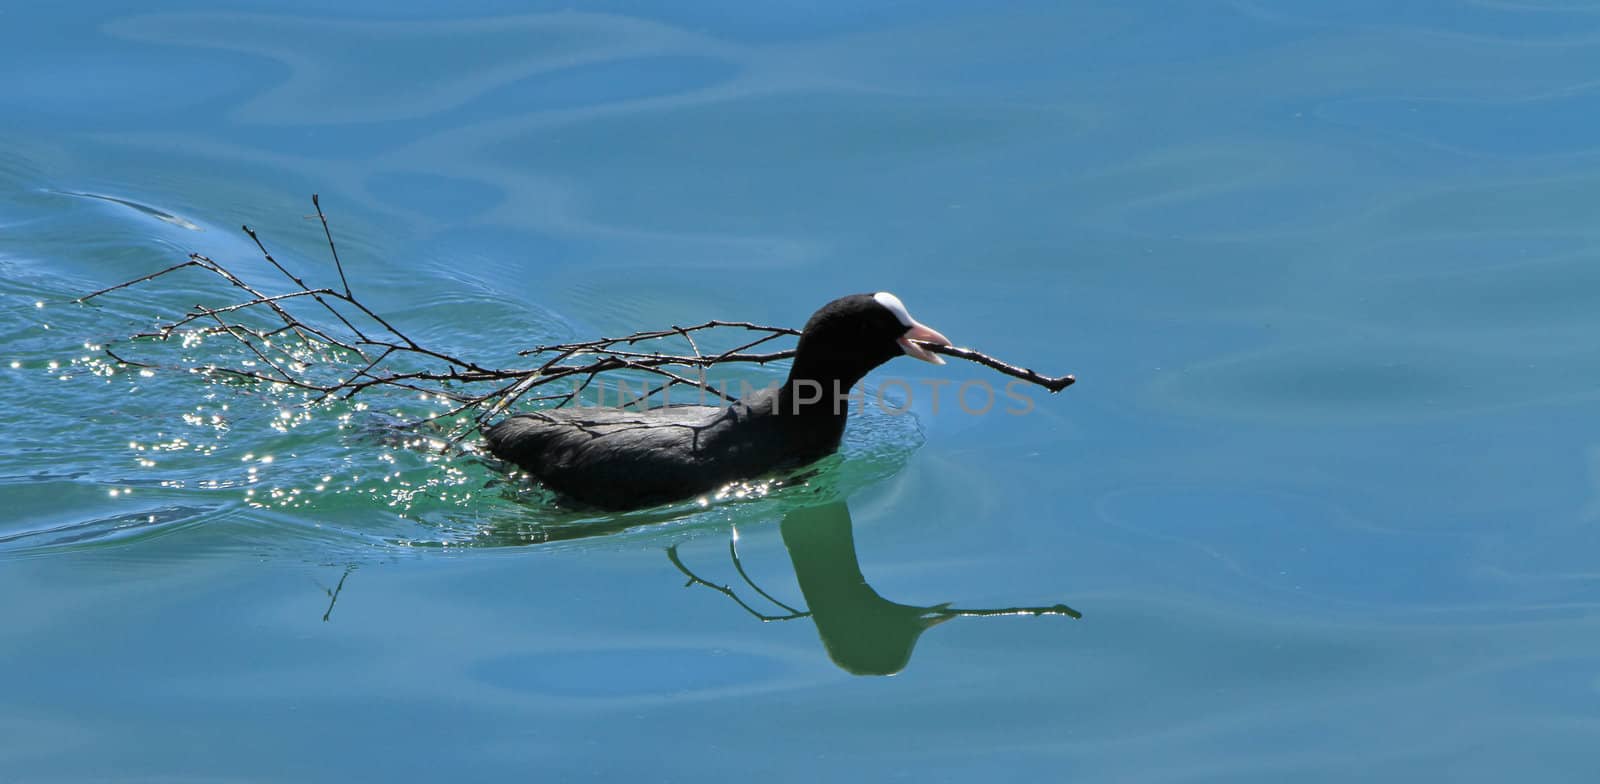 Coot duck holding a branch by Elenaphotos21